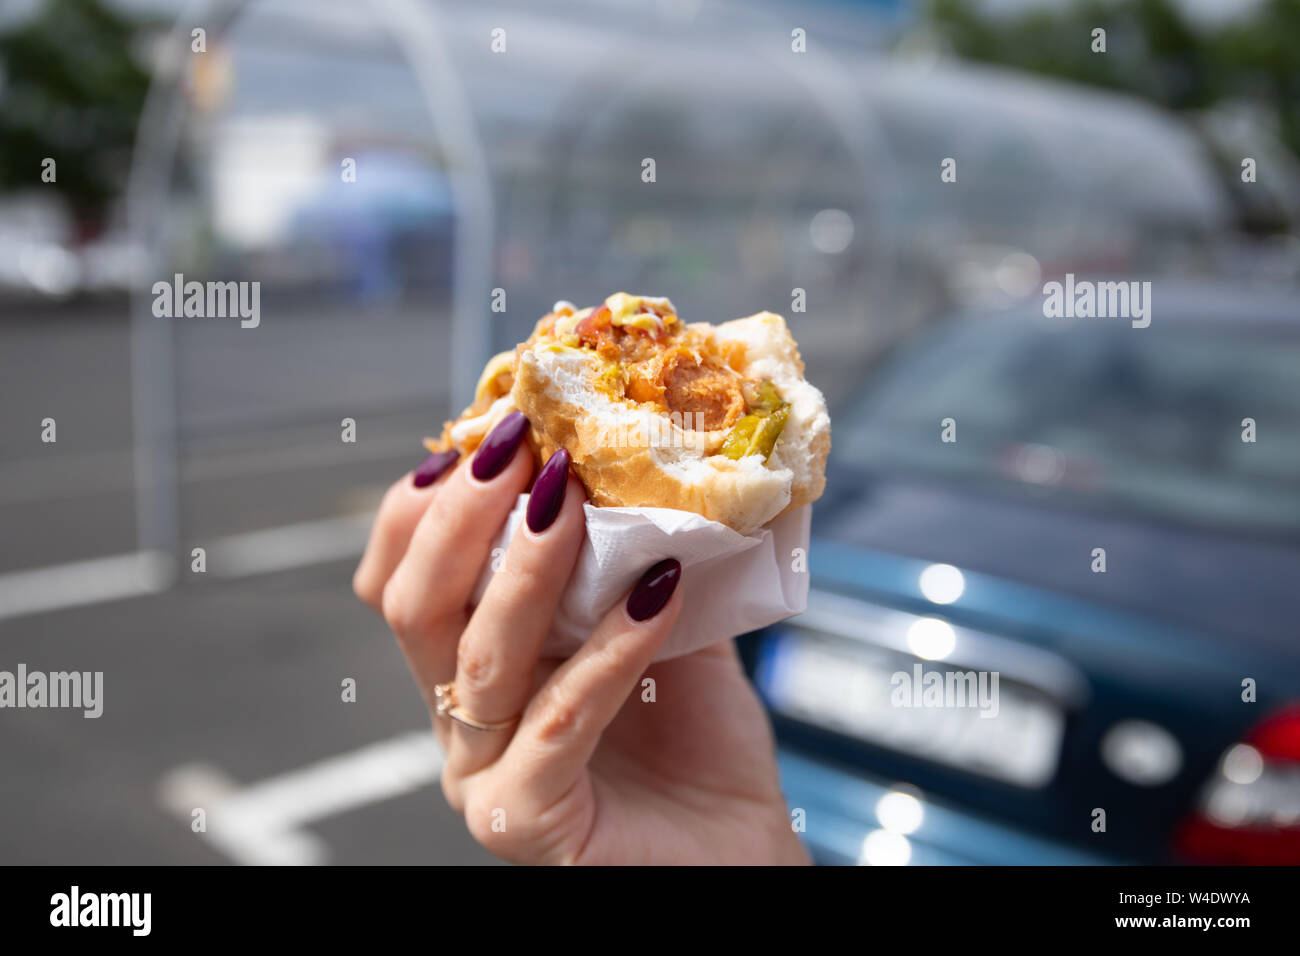 A young woman holds a bitten hot dog in her hand. Snack in the parking lot near the shopping center. Stock Photo